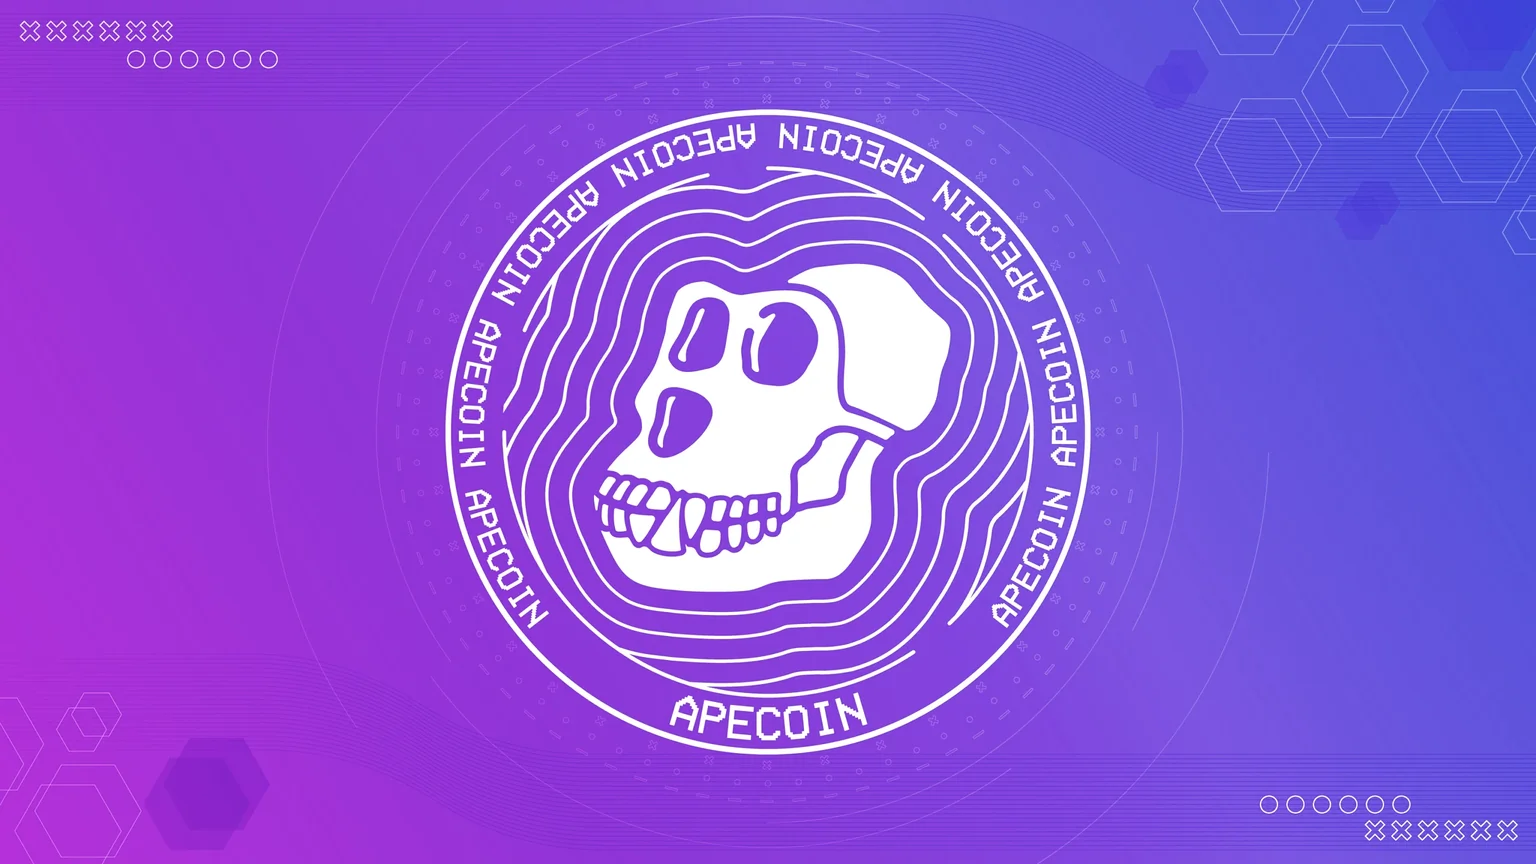 ApeCoin (APE) is the token of the Bored Ape Yacht Club (BAYC) ecosystem.